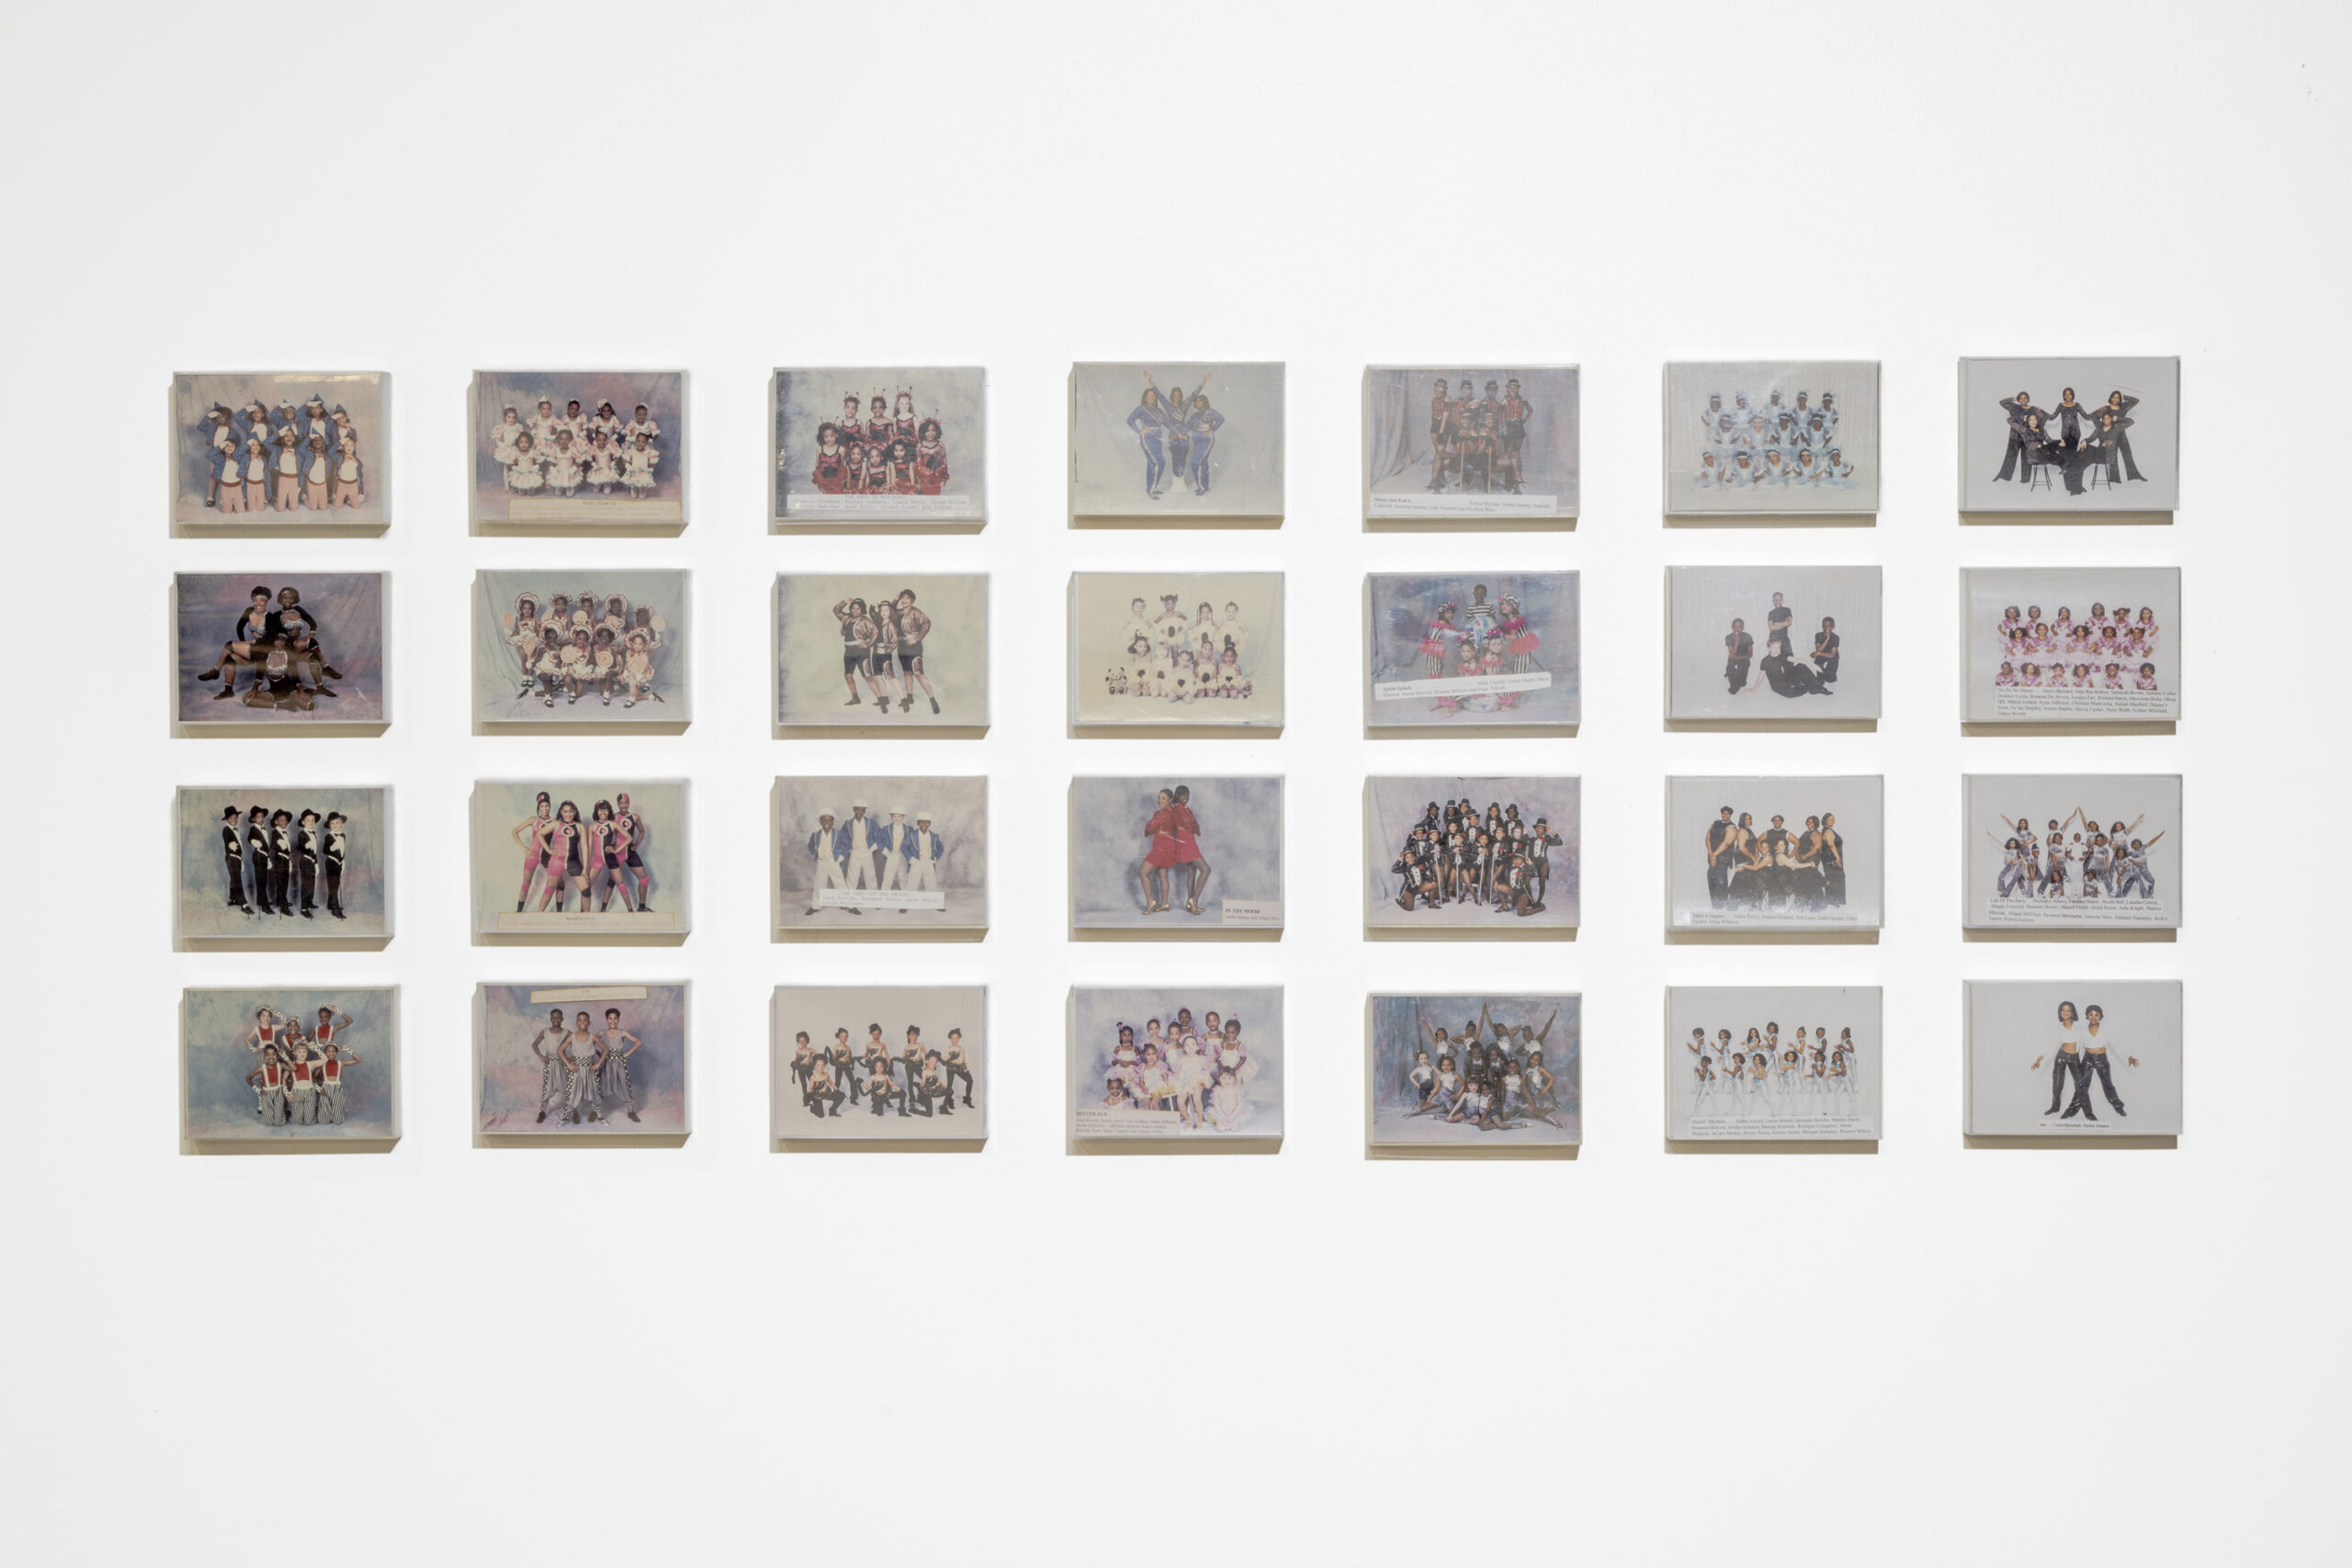 Grid of images of young group dancer portraits